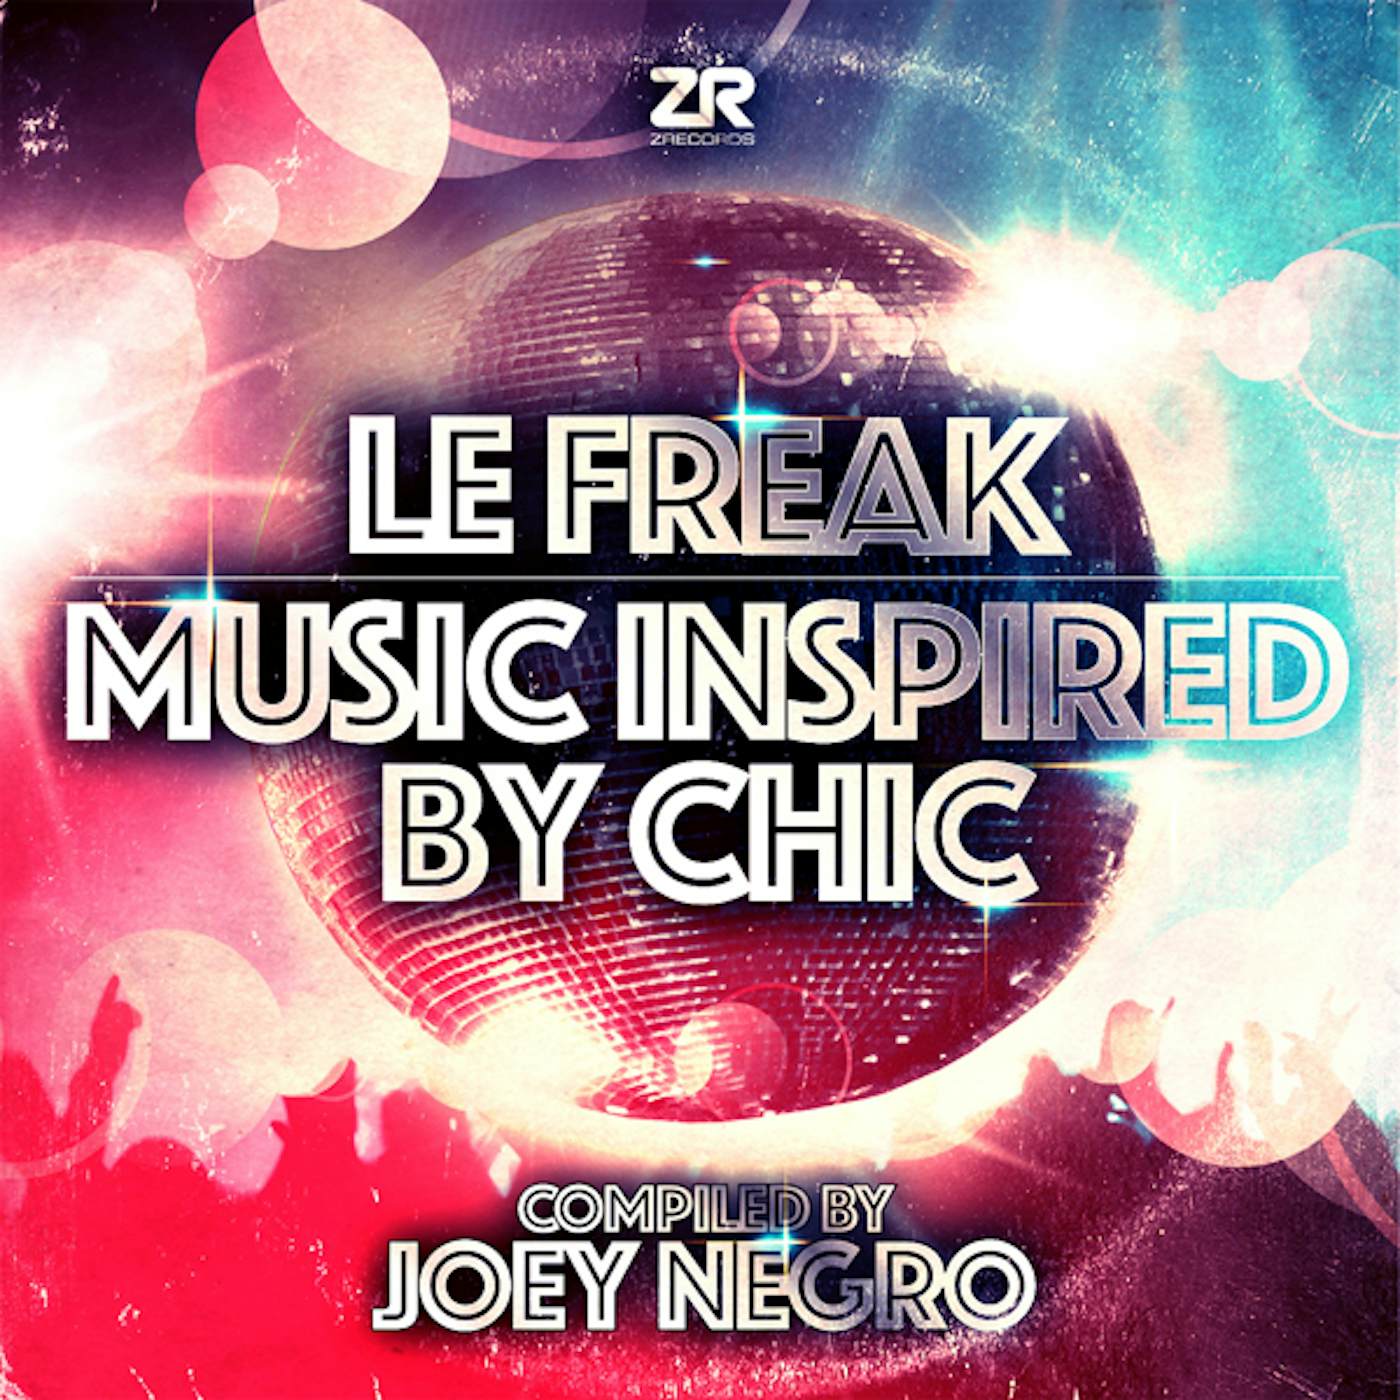 Joey Negro LE FREAK: MUSIC INSPIRED BY CHIC Vinyl Record